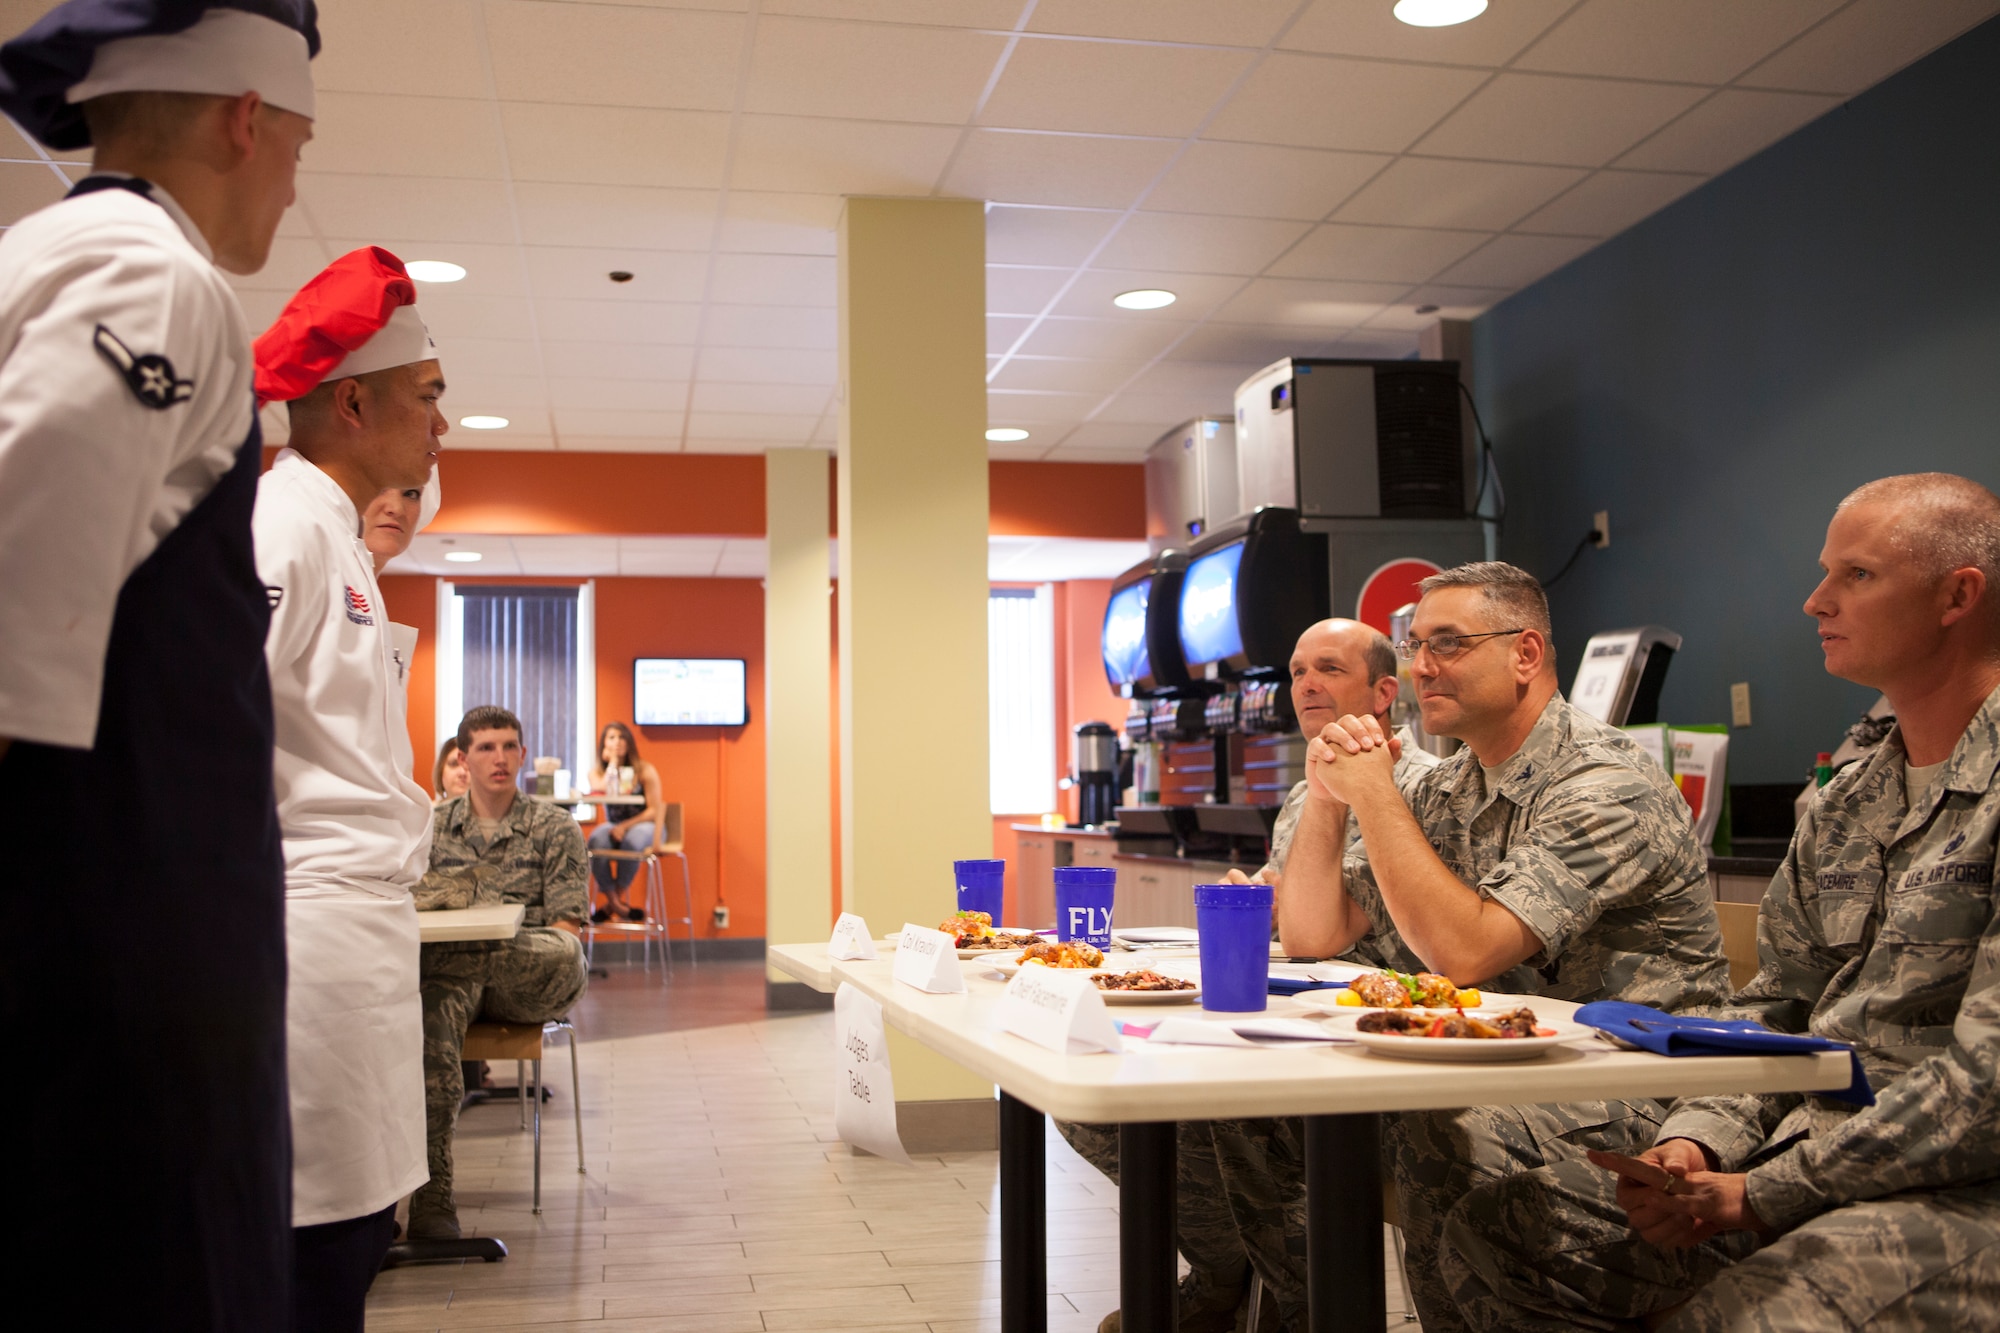 Col. Trevor Flint, 90th Maintenance Group commander; Col. Stephen Kravitsky, 90th Missile Wing commander; and Chief Master Sgt. John Facemire, 90th Mission Support Group command chief, judge the entrees and desserts presented to them during a culinary competition held at the Chadwell Dining Facility on F.E. Warren Air Force Base, Wyo., Aug. 27, 2015. The winning entree was a peanut butter cracker crusted chicken roulade with herb cream sauce and a brownie, chocolate panna cotta, caramel tuile cookie and chocolate drizzle for dessert. (U.S. Air Force photo by Lan Kim)